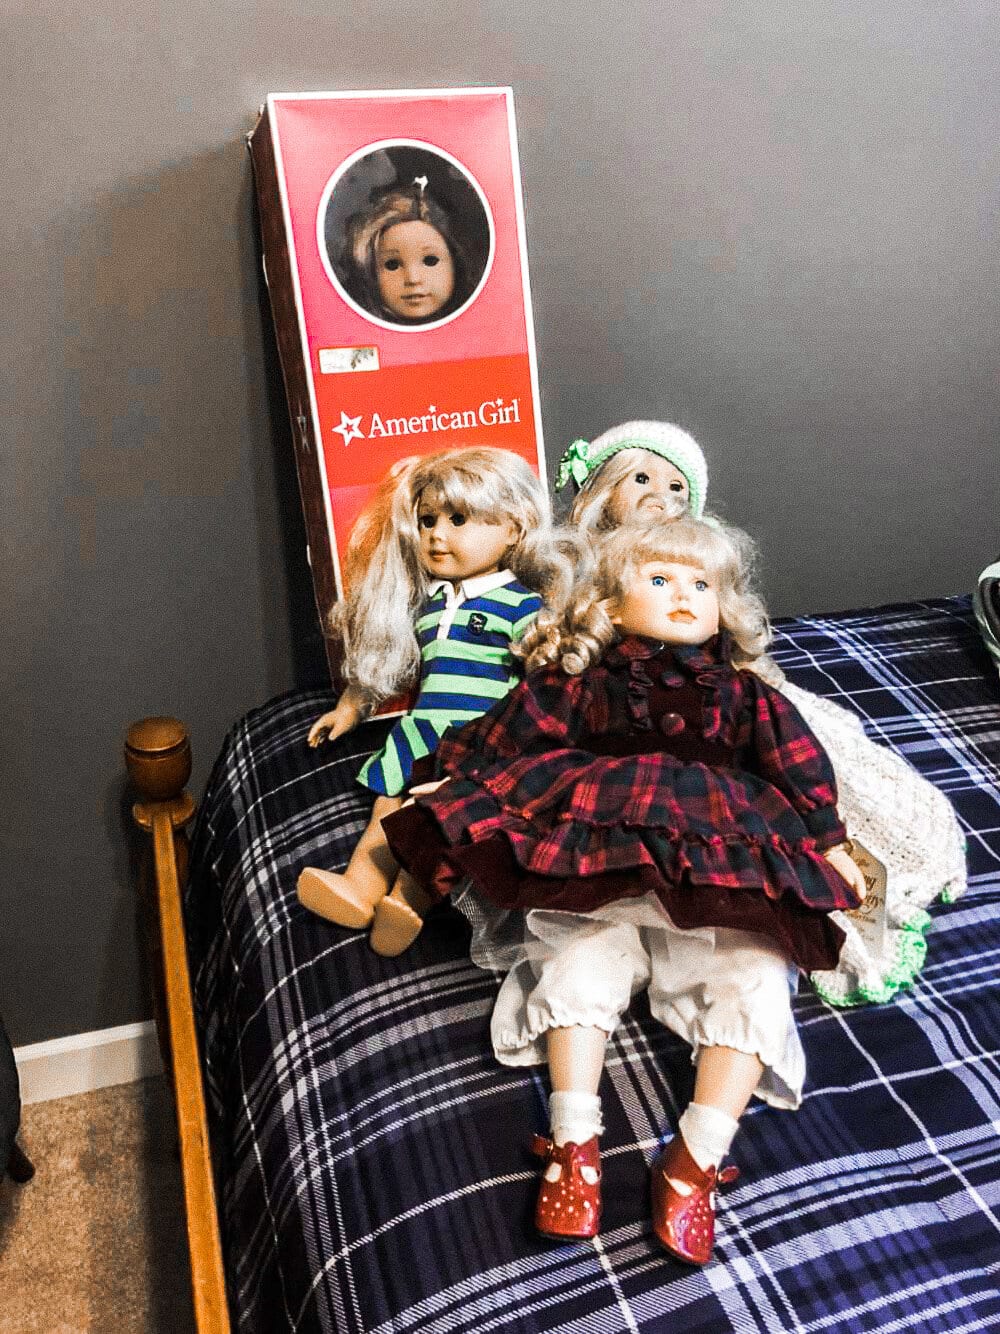 Mary Green, freshman at NGU, has a collection of American Girl dolls.